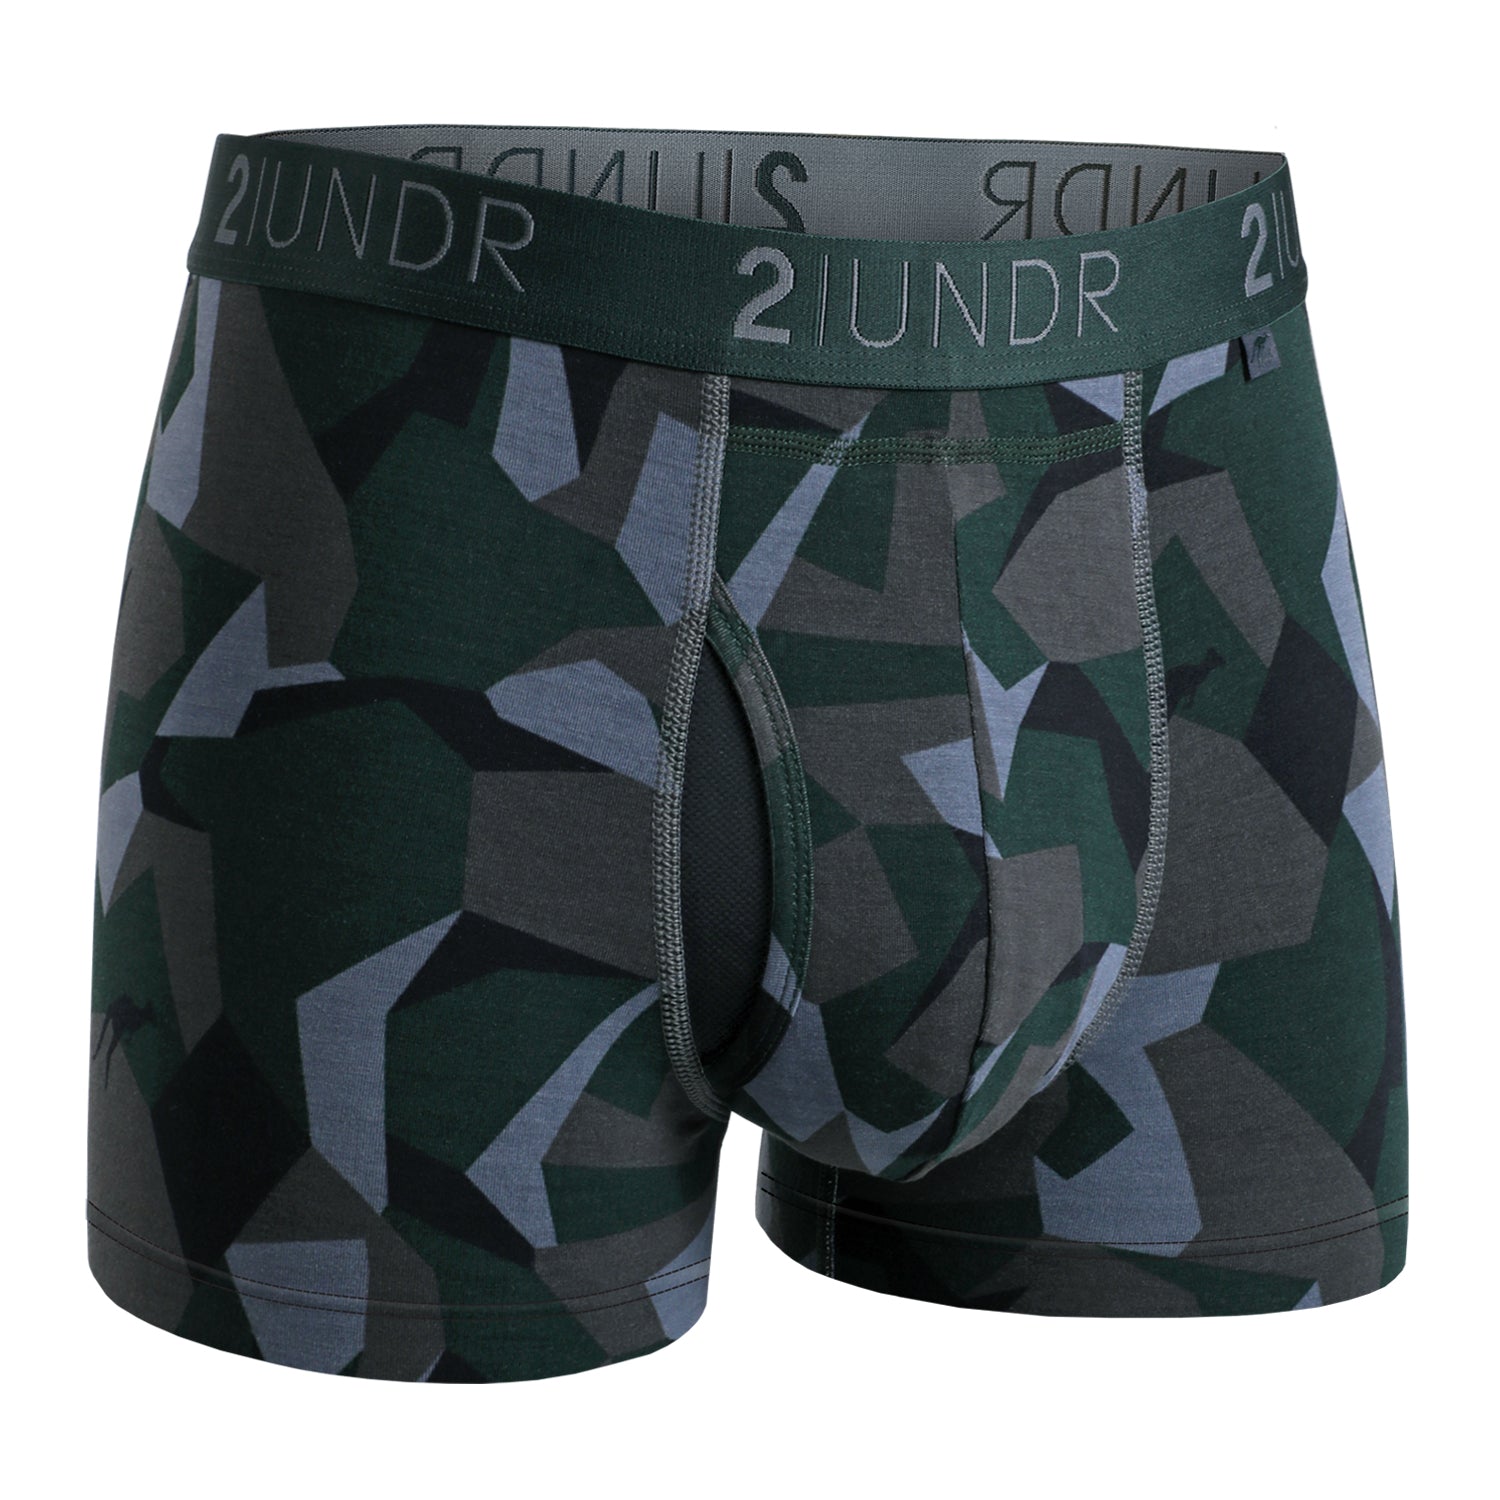 2Undr Swing Shift Trunk Print - Forest Camo